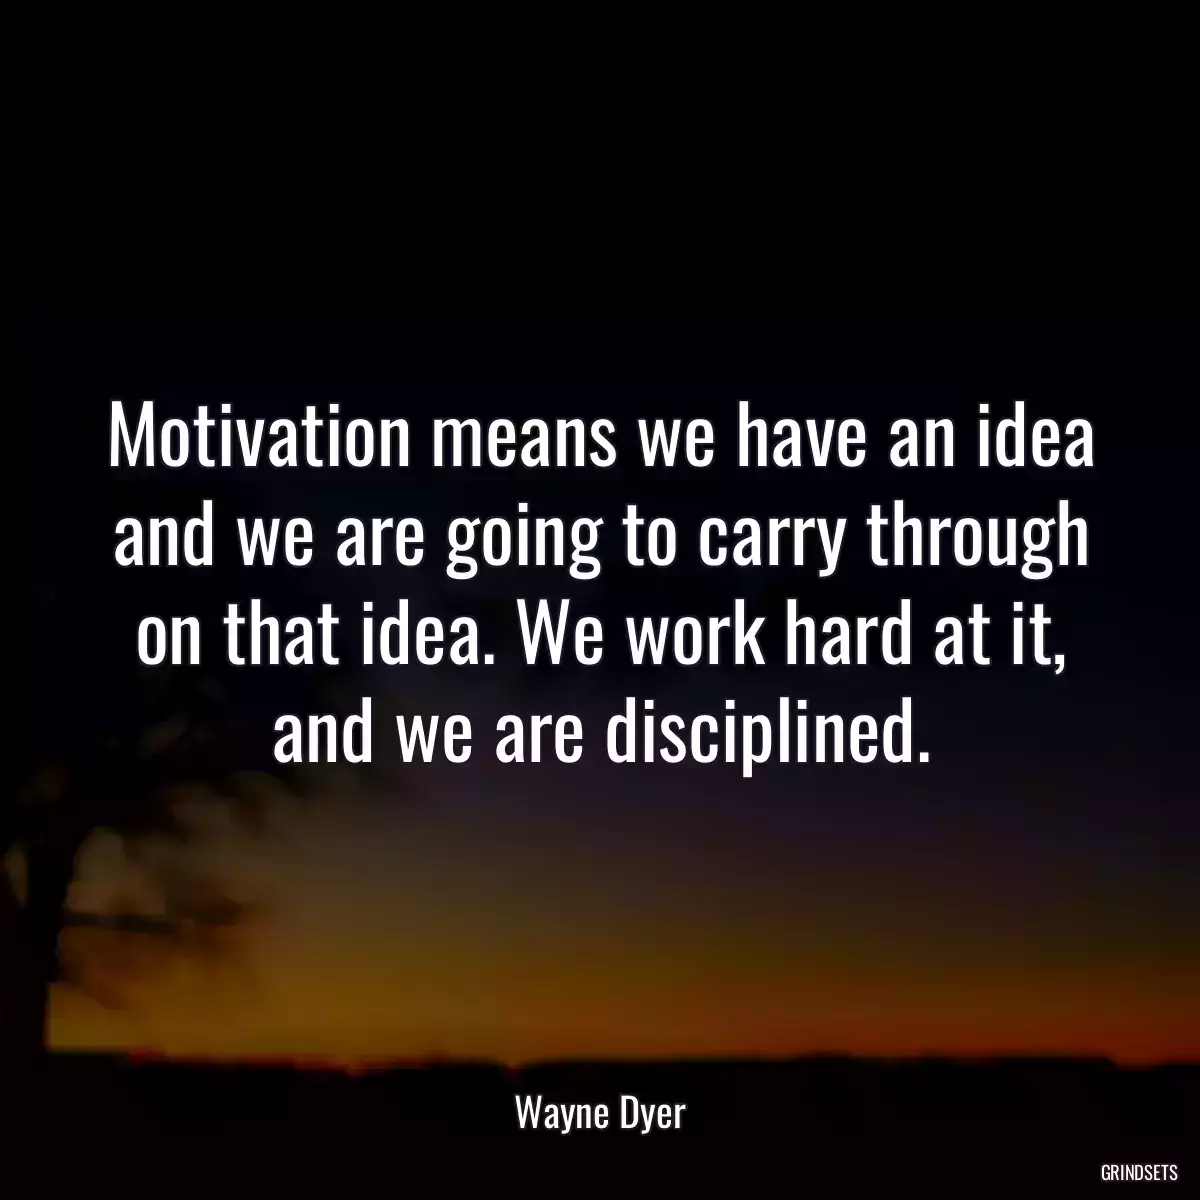 Motivation means we have an idea and we are going to carry through on that idea. We work hard at it, and we are disciplined.